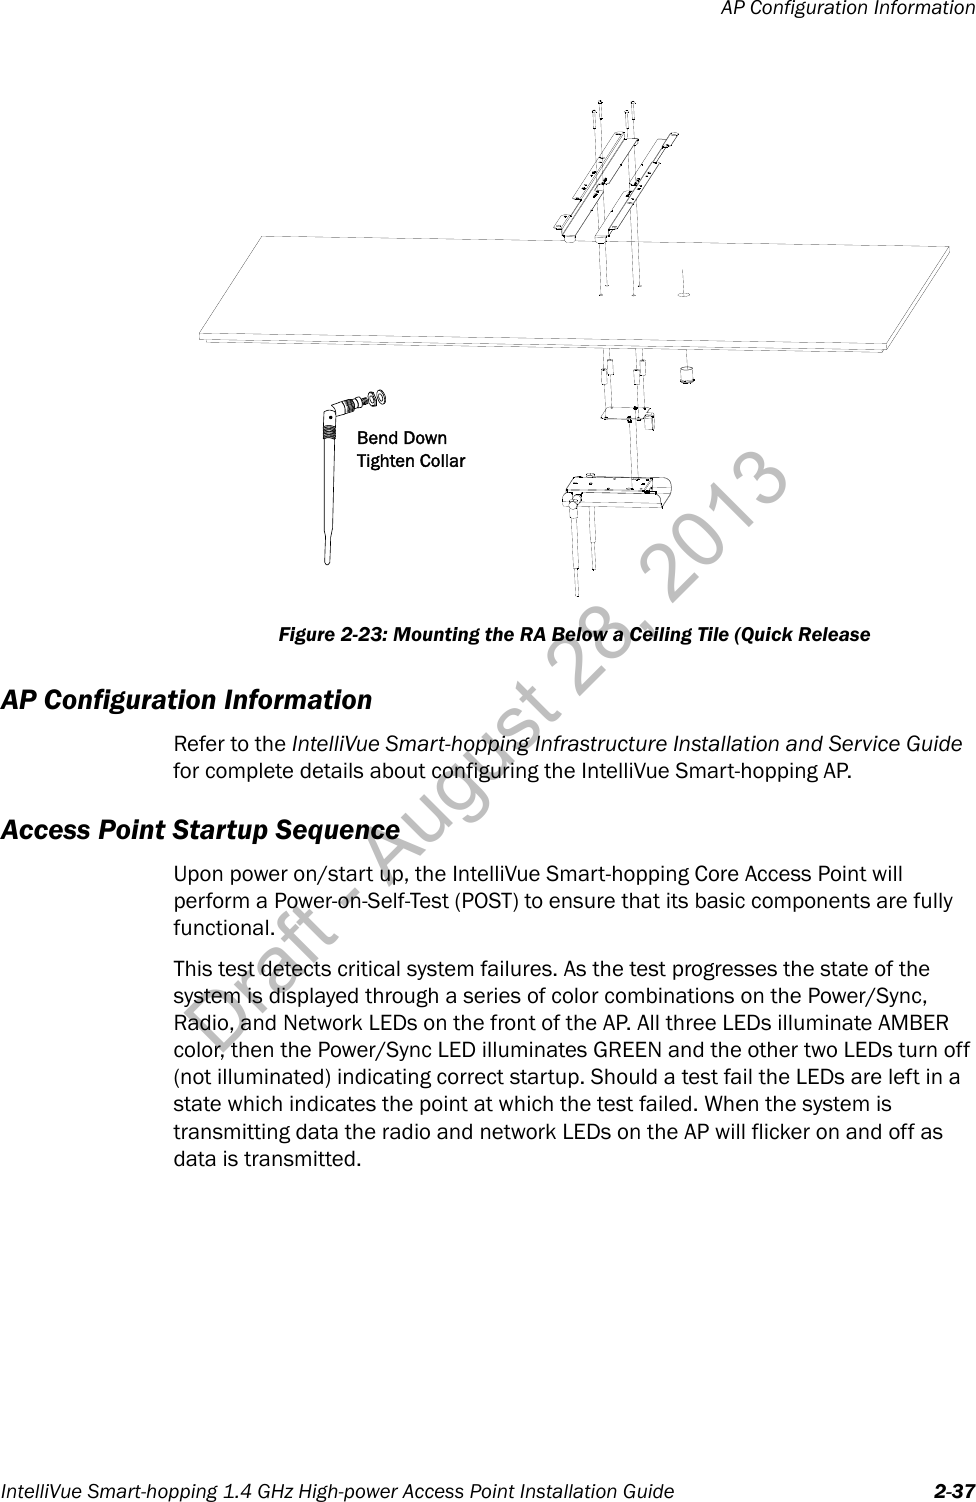 AP Configuration InformationIntelliVue Smart-hopping 1.4 GHz High-power Access Point Installation Guide 2-37AP Configuration InformationRefer to the IntelliVue Smart-hopping Infrastructure Installation and Service Guide for complete details about configuring the IntelliVue Smart-hopping AP.Access Point Startup SequenceUpon power on/start up, the IntelliVue Smart-hopping Core Access Point will perform a Power-on-Self-Test (POST) to ensure that its basic components are fully functional.This test detects critical system failures. As the test progresses the state of the system is displayed through a series of color combinations on the Power/Sync, Radio, and Network LEDs on the front of the AP. All three LEDs illuminate AMBER color, then the Power/Sync LED illuminates GREEN and the other two LEDs turn off (not illuminated) indicating correct startup. Should a test fail the LEDs are left in a state which indicates the point at which the test failed. When the system is transmitting data the radio and network LEDs on the AP will flicker on and off as data is transmitted.Figure 2-23: Mounting the RA Below a Ceiling Tile (Quick ReleaseBend DownTighten CollarDraft - August 28, 2013